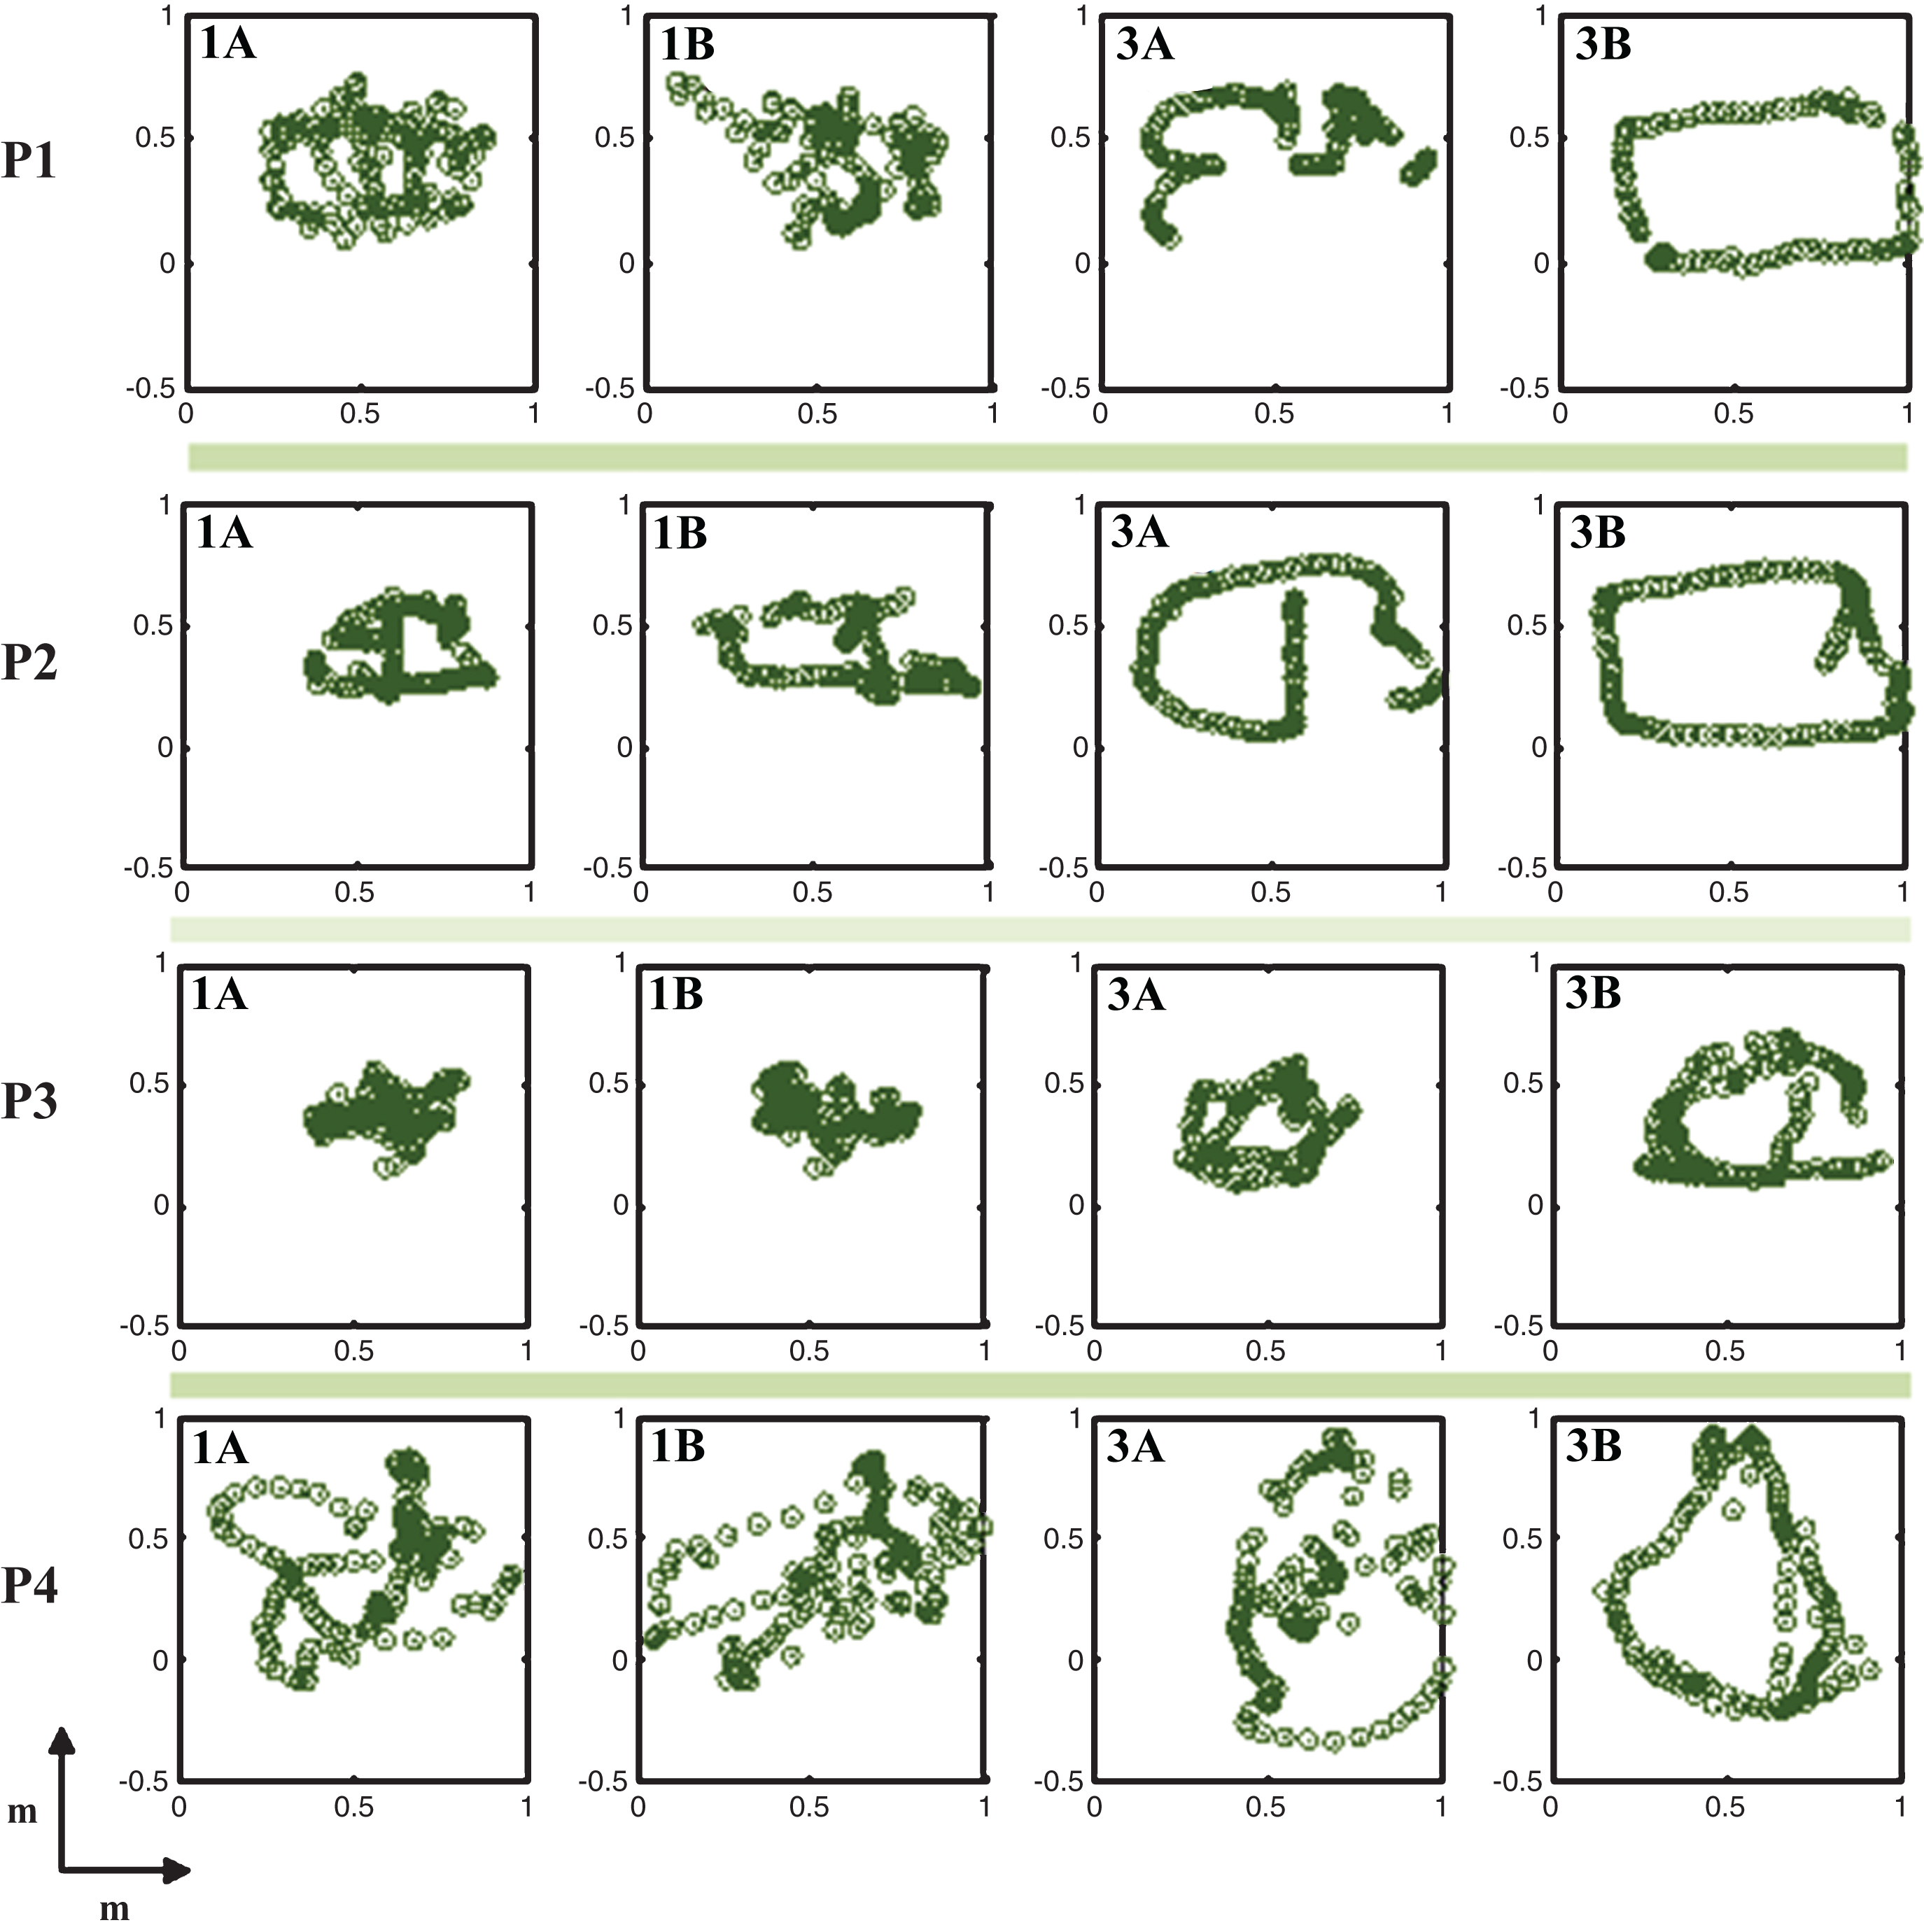 Sample movement traces from the participant-led phases 1 and 3. Each row shows the traces from the movements of a single participant (P1, P2, P3, P4). In each row, the images from left to right show the movements the participant performed while the robot followed him or her (Phases 1A, 1B, 3A, and 3B, respectively).